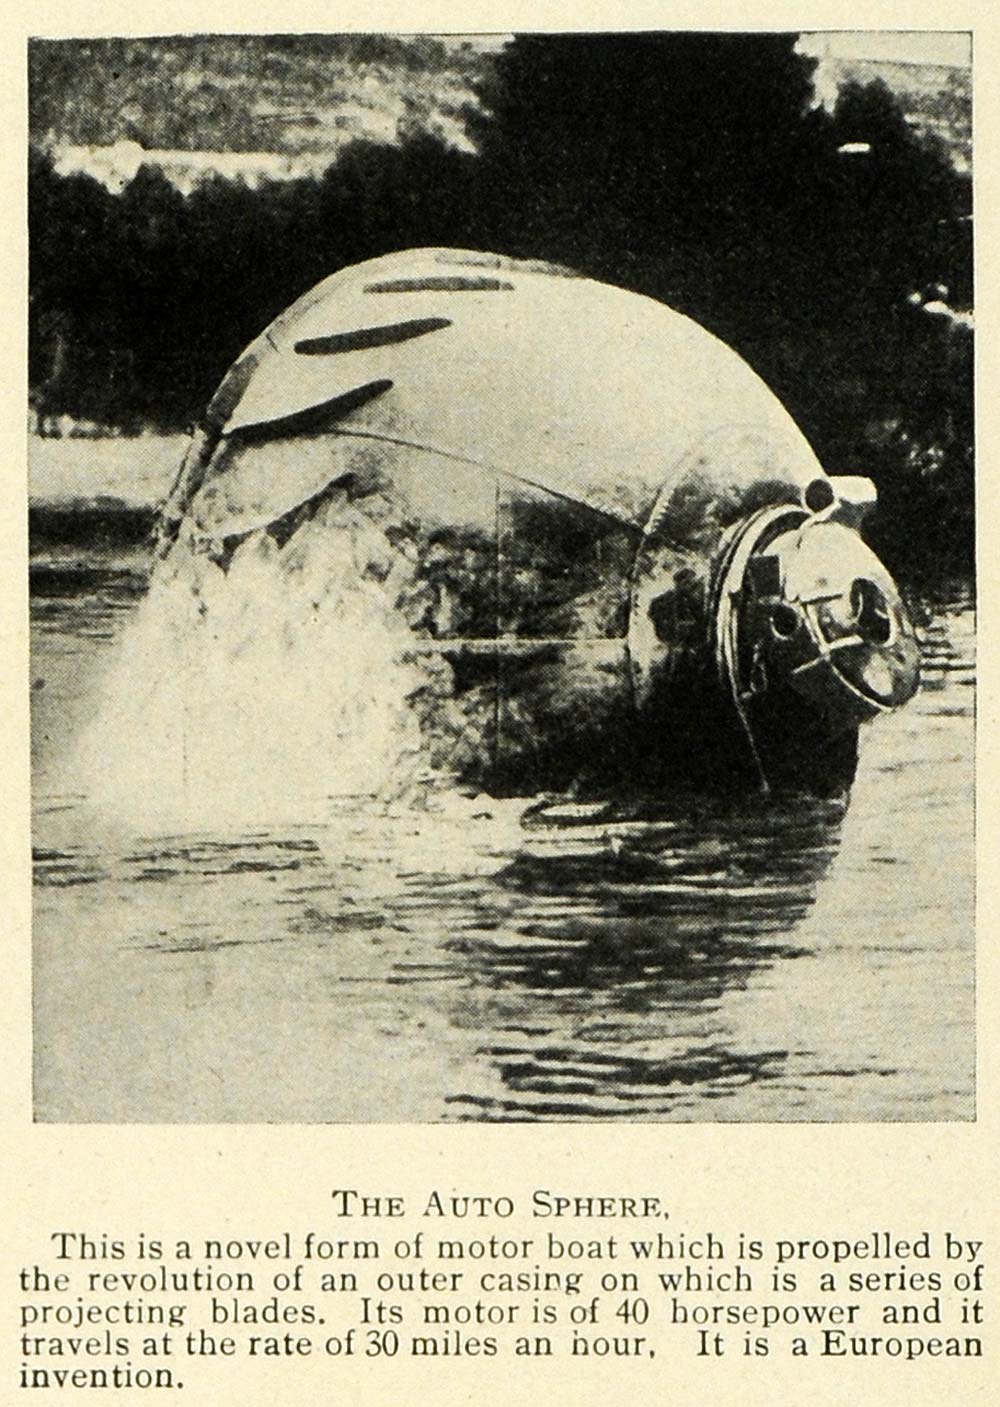 1912 Print Auto Sphere Motor Boat Invention Science Blade Sailing Research TW4